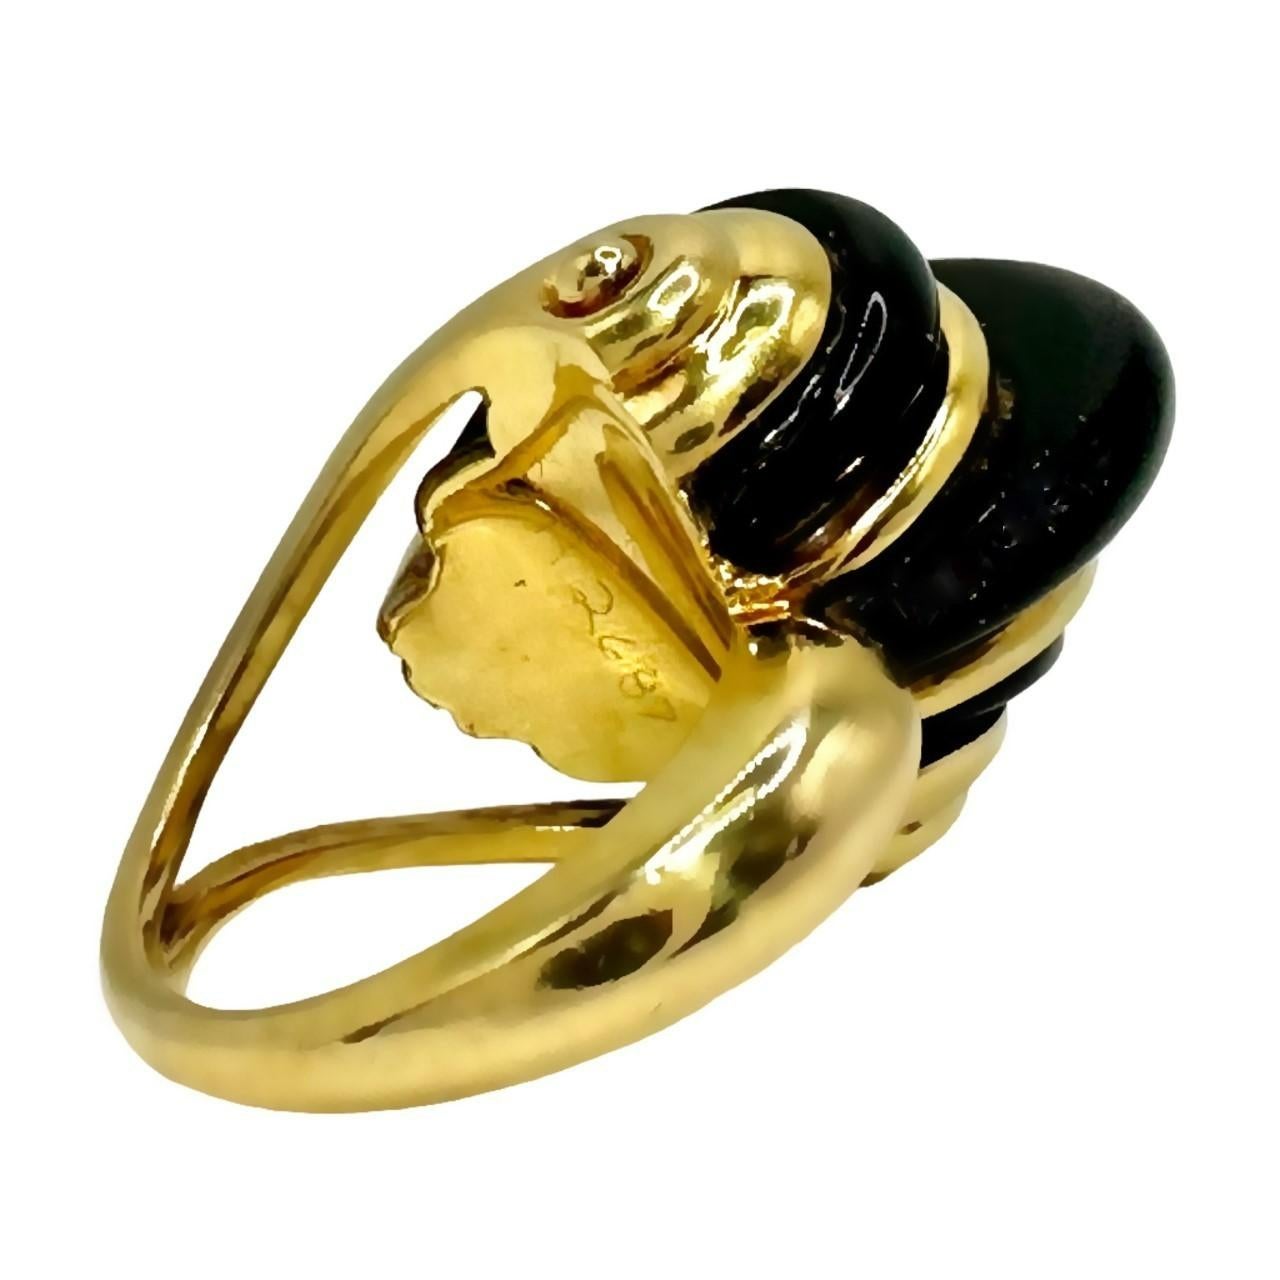 18k Yellow Gold and Onyx Vintage American Modernist Ring 2